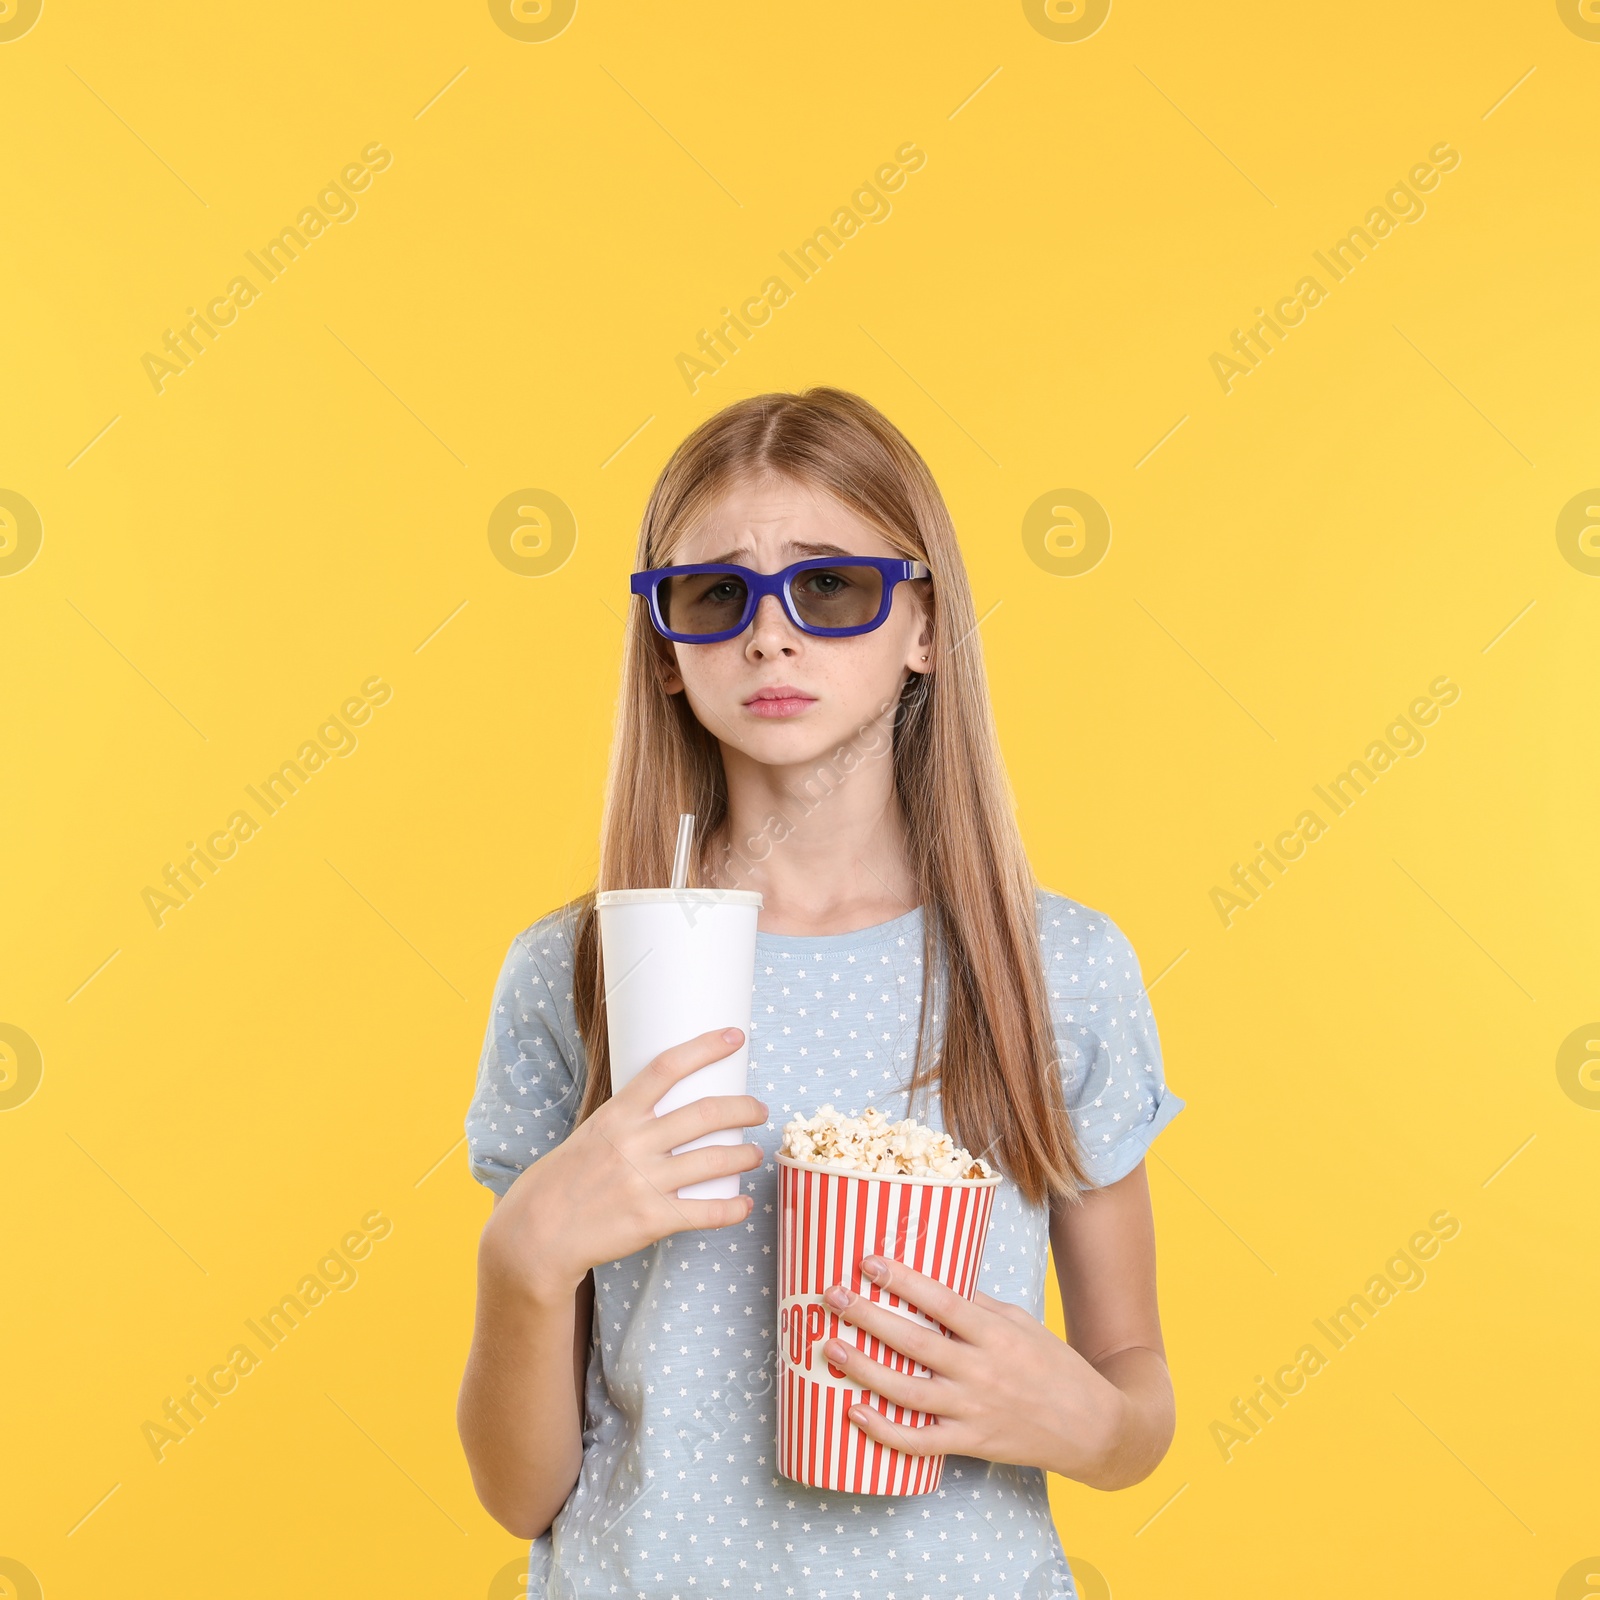 Photo of Emotional teenage girl with 3D glasses, popcorn and beverage during cinema show on color background